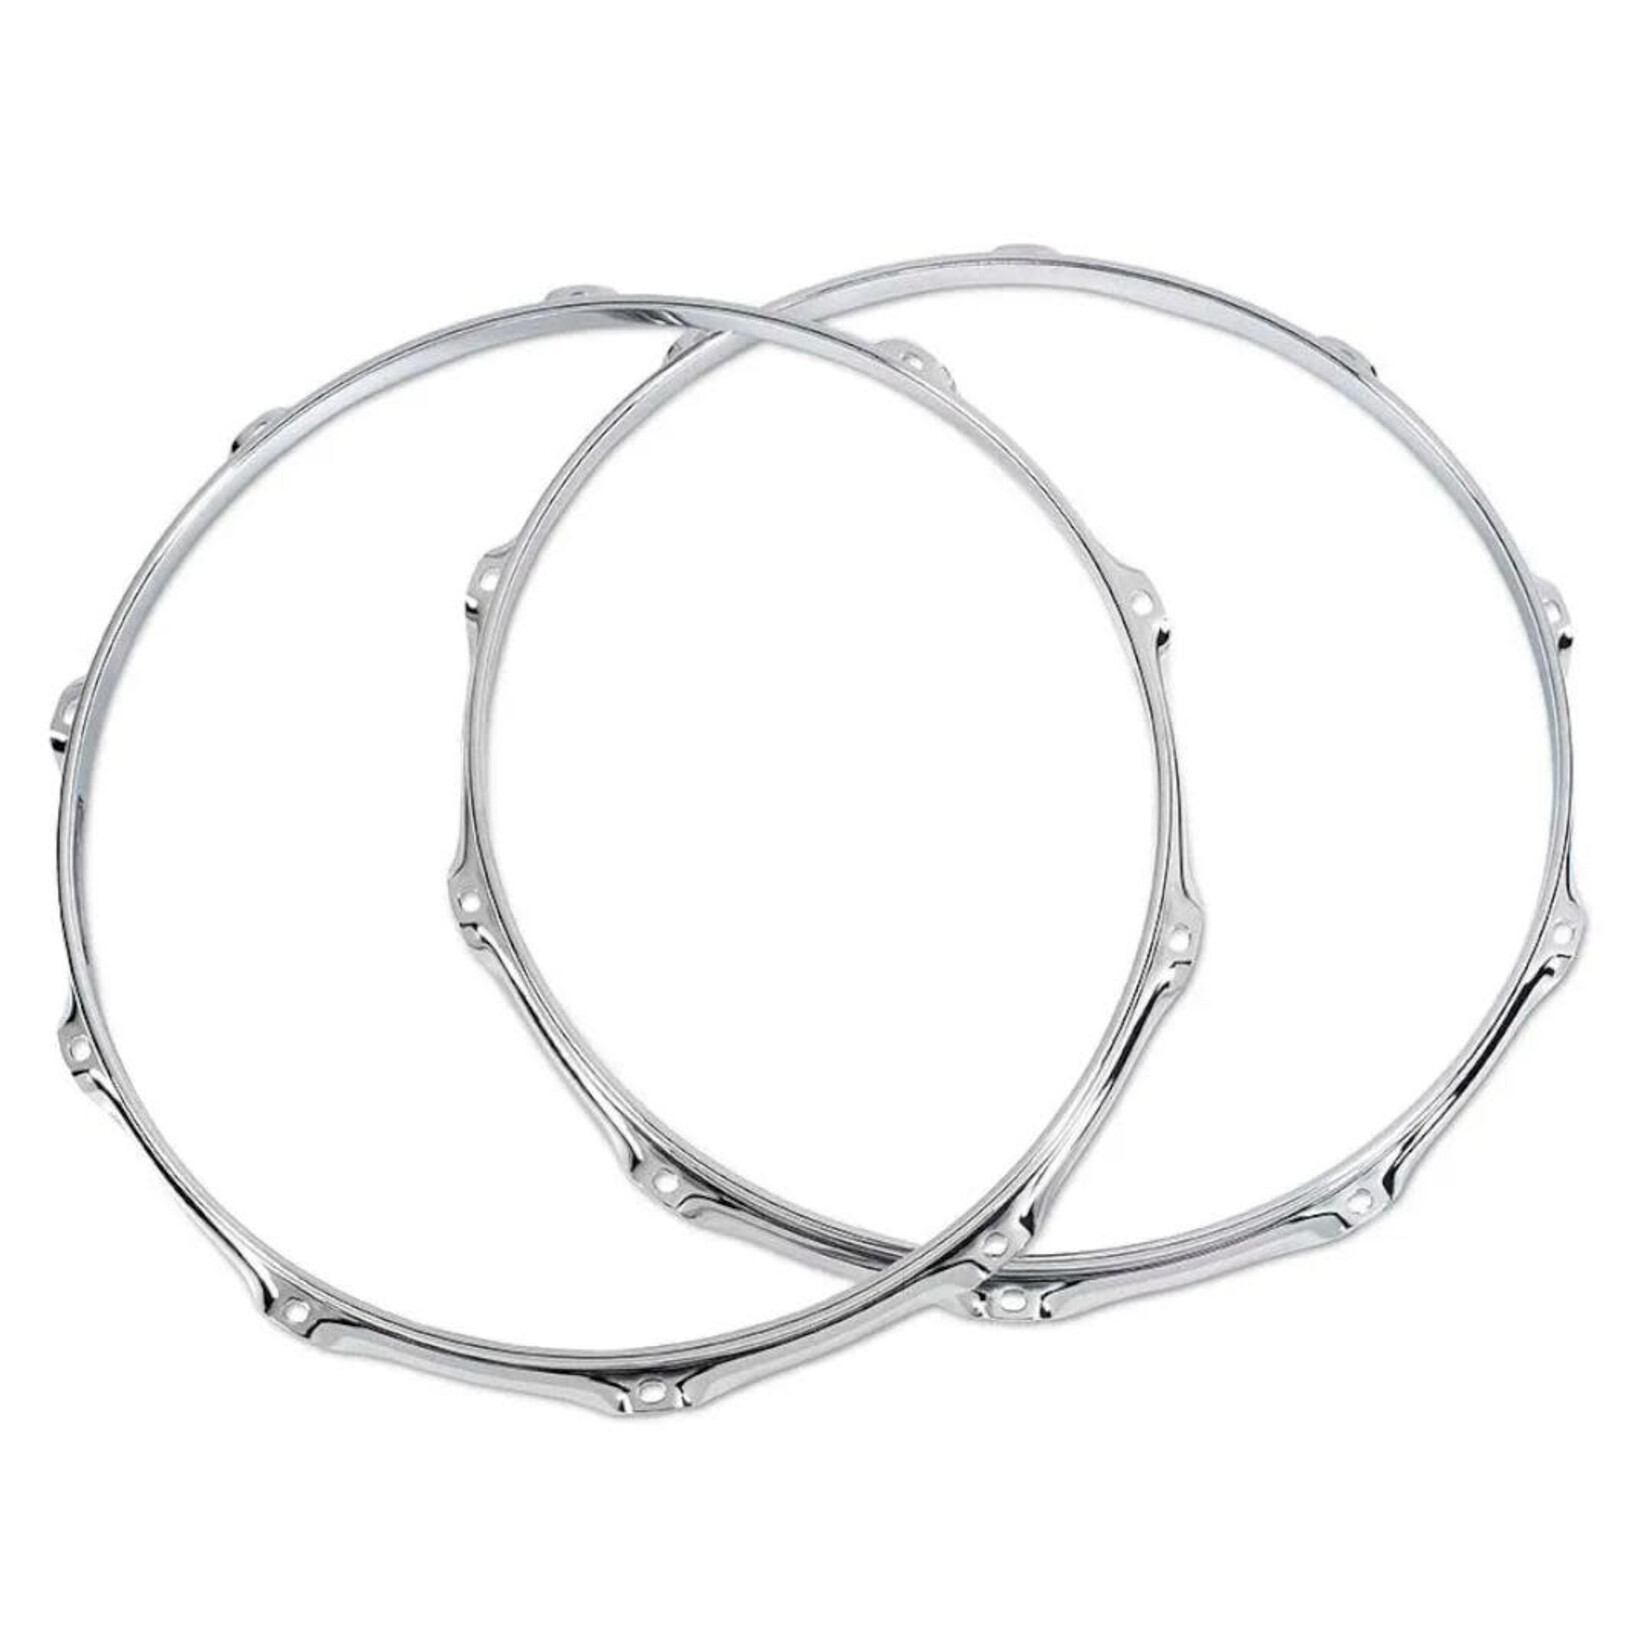 DW DW True Hoop 14" 10-Lug Snare Batter and Resonant Pair - Chrome